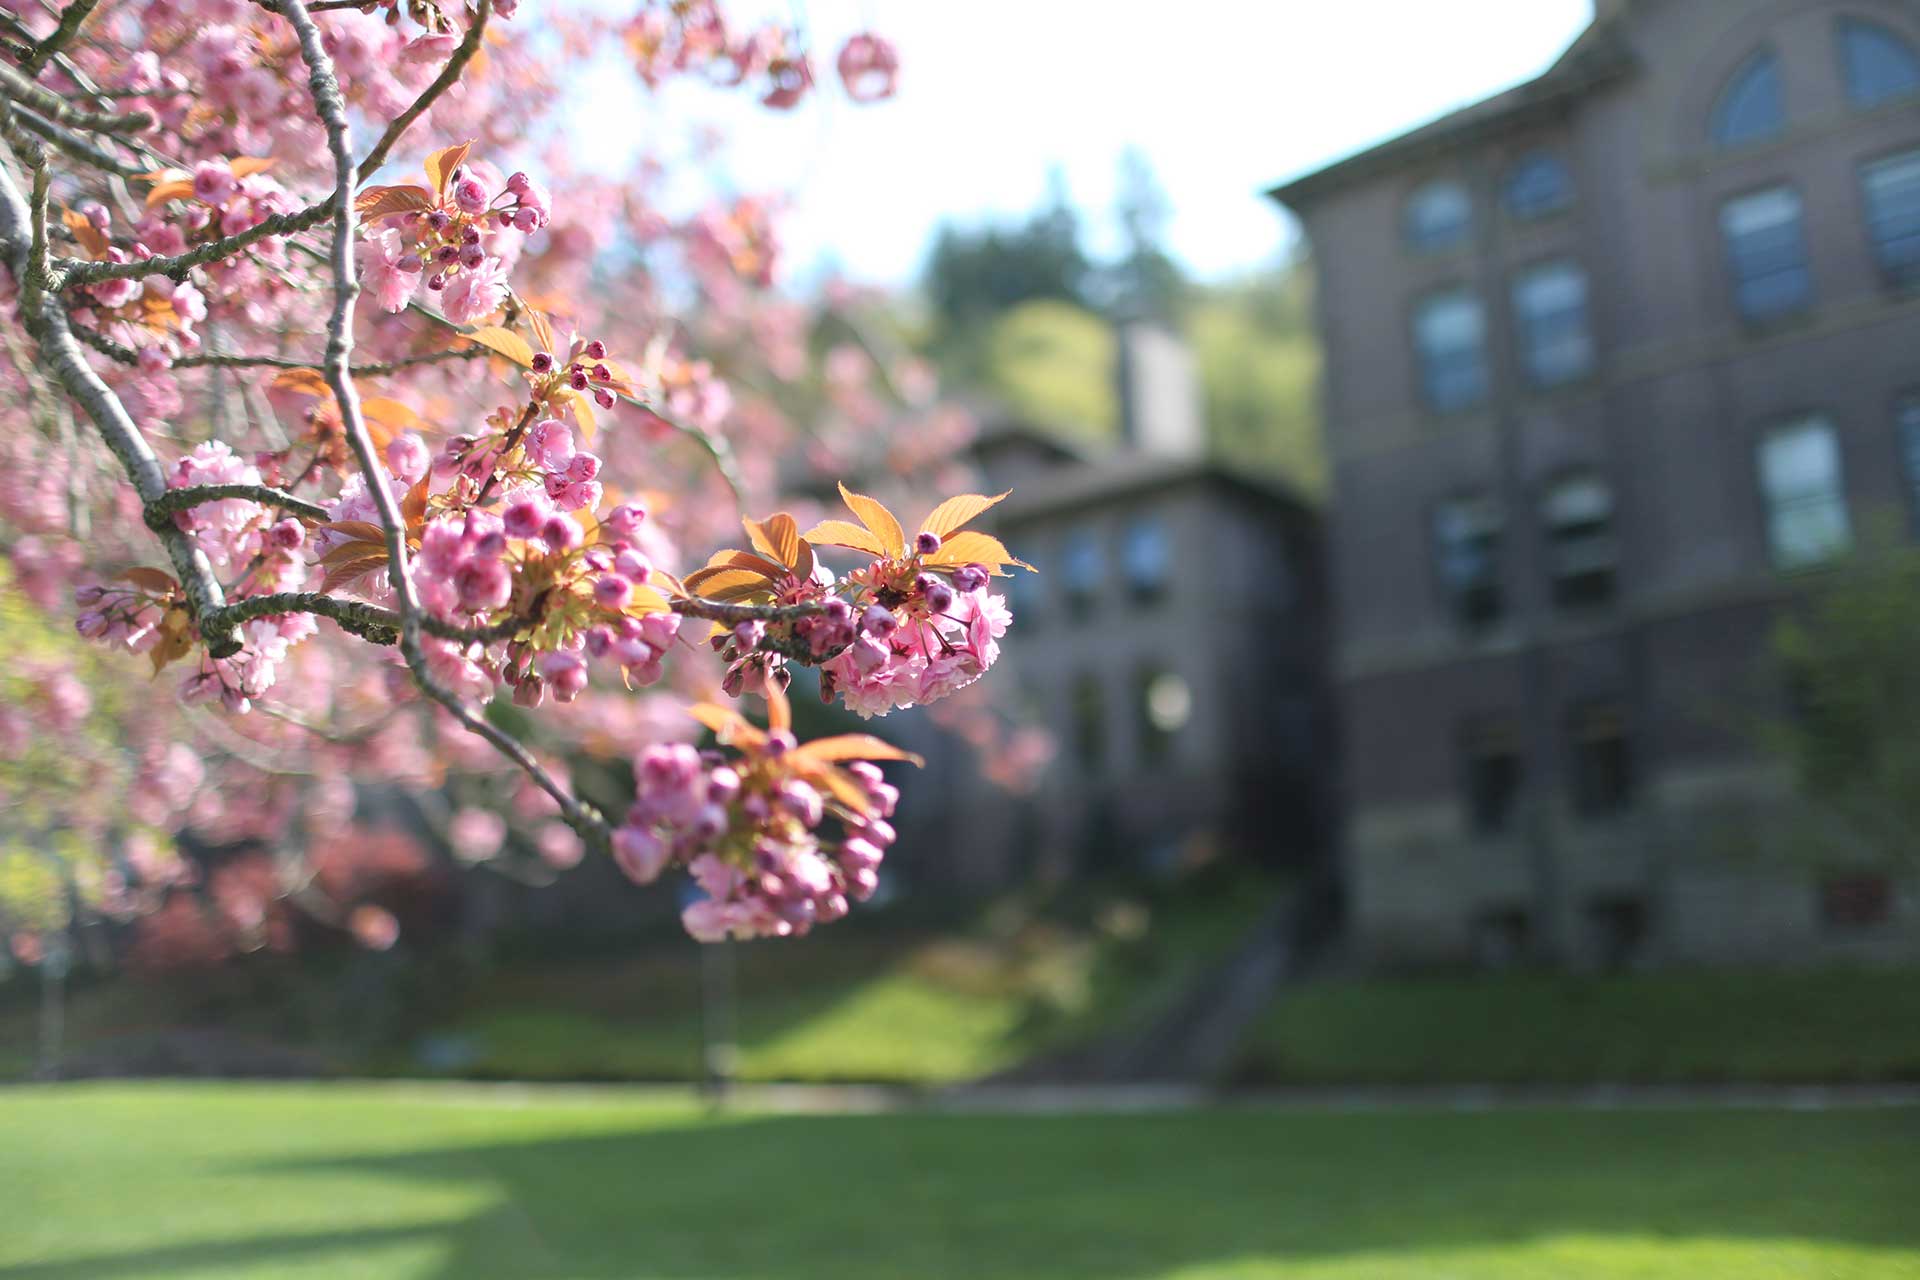 Cherry blossoms in the foreground, a nicely landscaped campus in the background